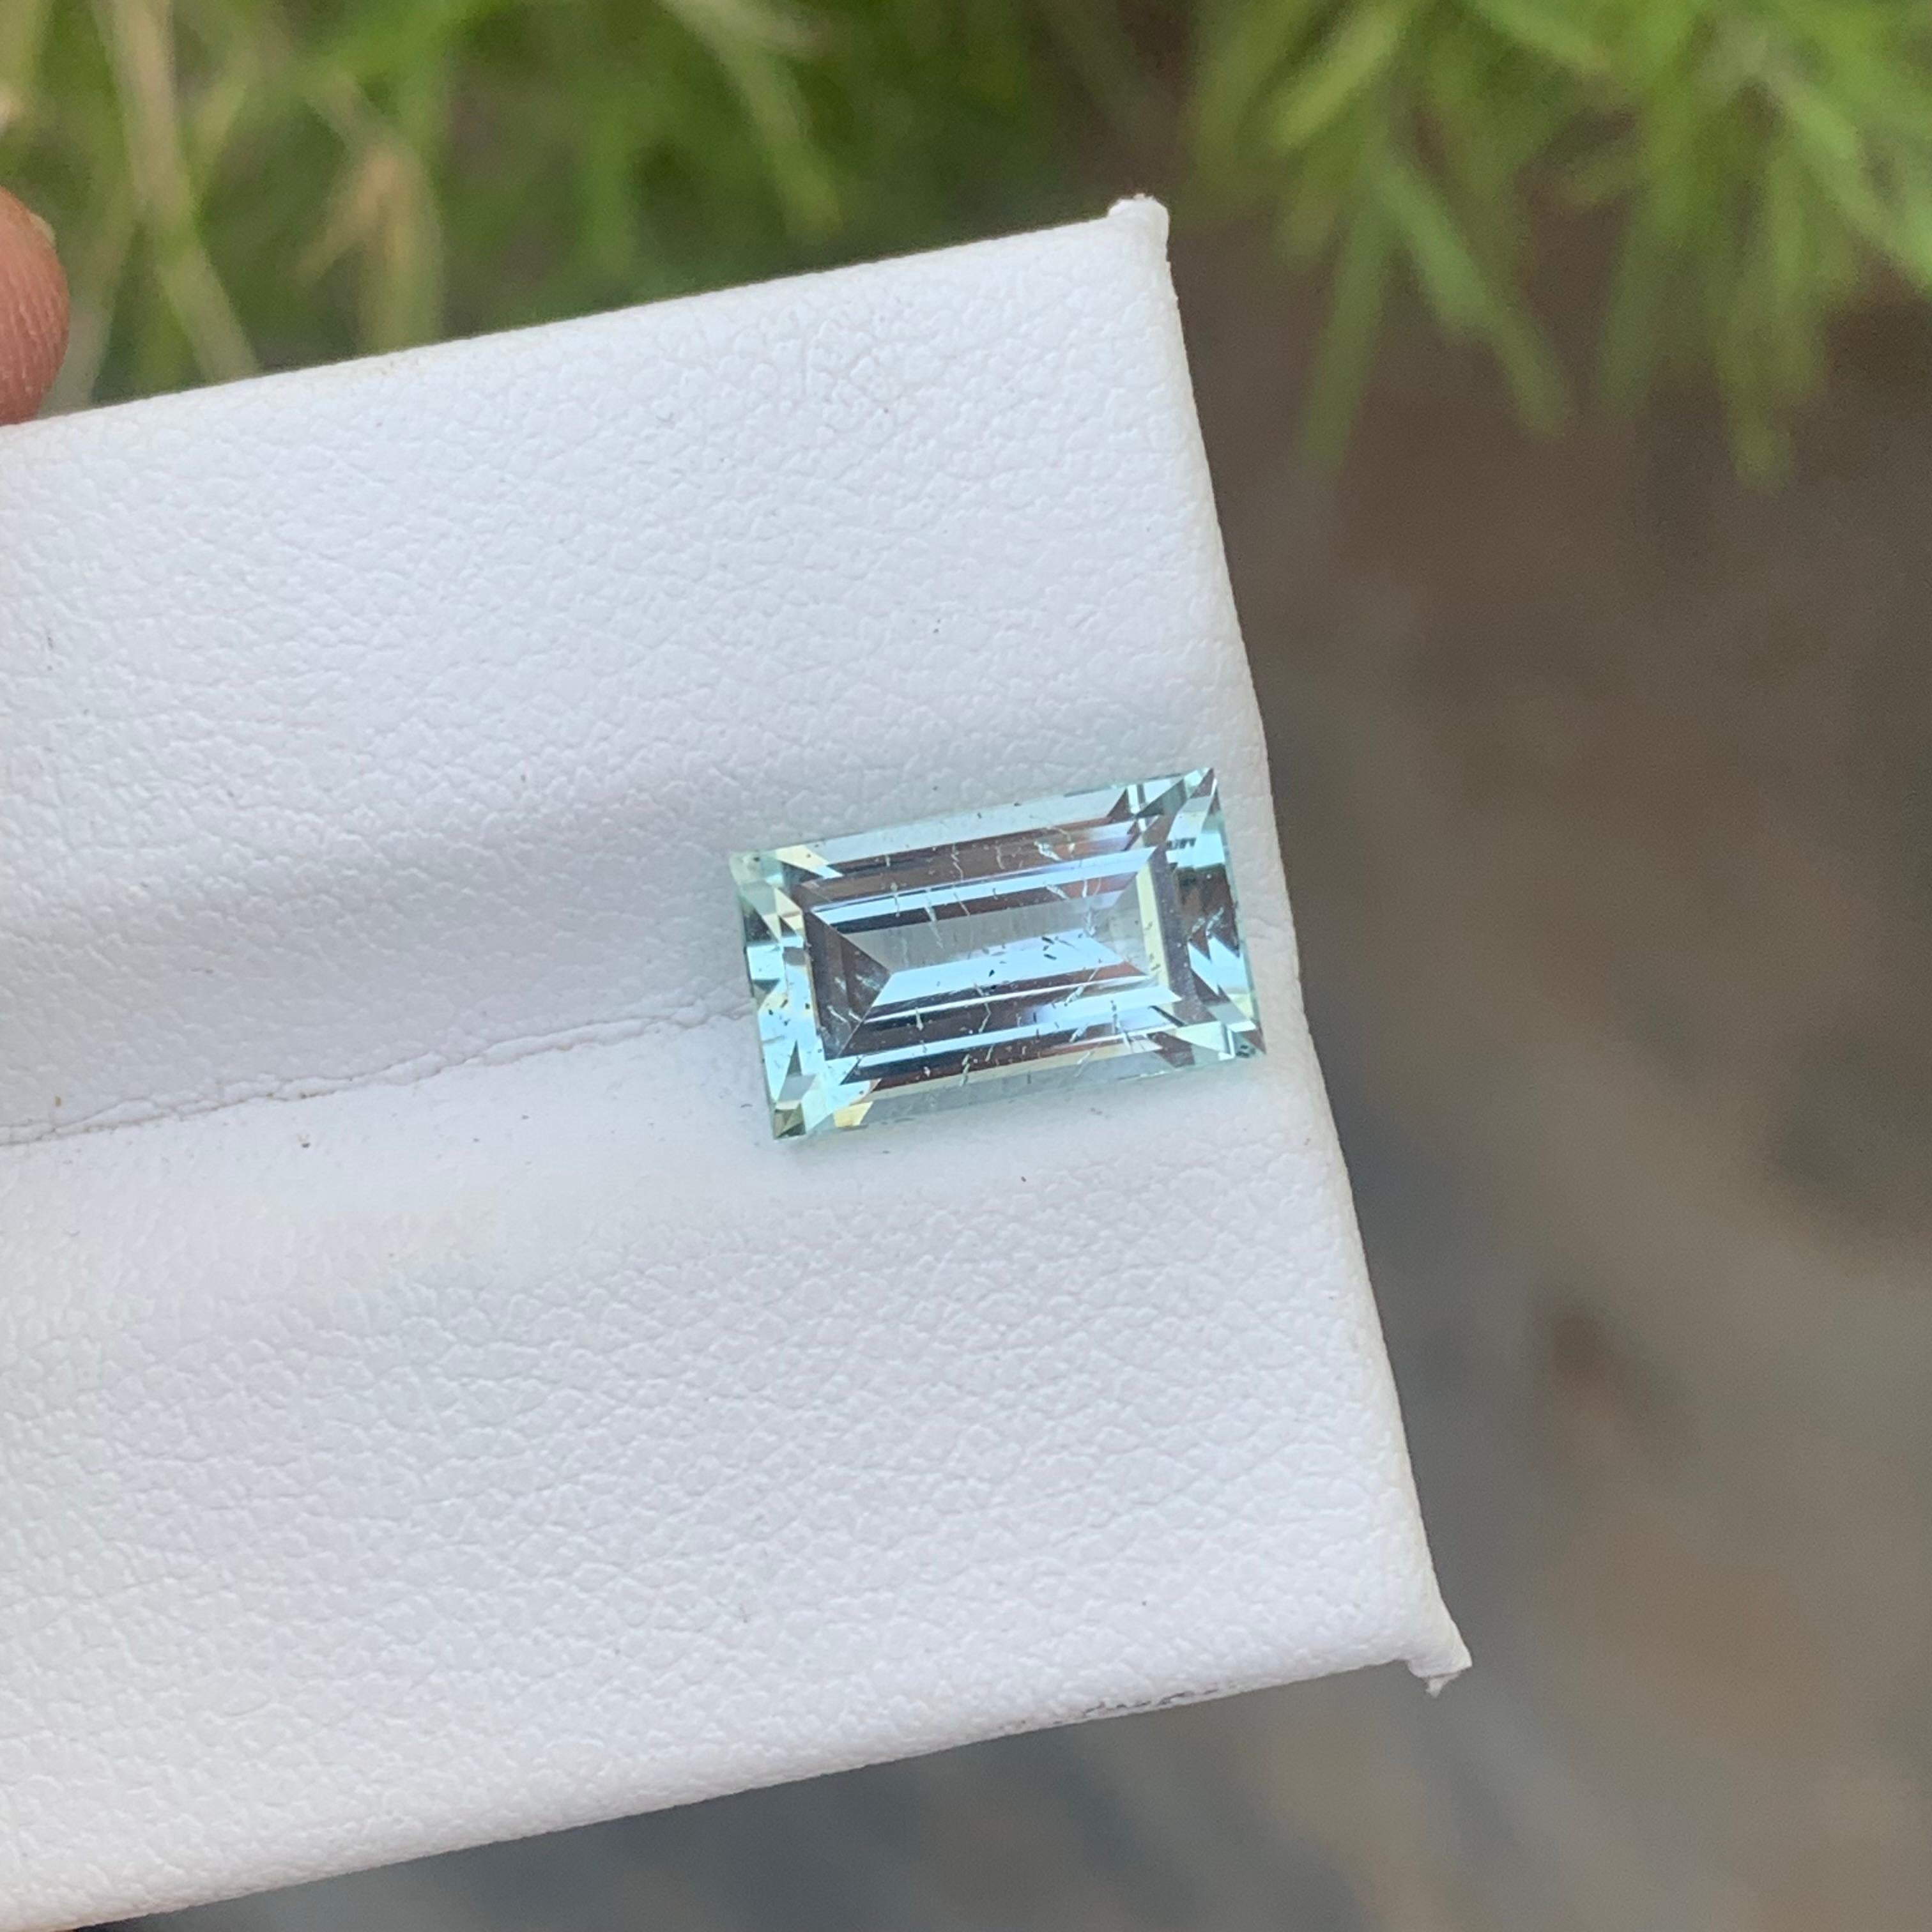 Faceted Aquamarine
Weight: 3 Carats
Dimension: 11.2x6.6x5.3 Mm
Origin: Shigar Valley Pakistan
Color: Seafoam / Light Blue
Birth Month: March
Shape: Baguette
Facet: Baguette
Treatment: Non
Certificate: On Demand
Some basic benefits of wearing